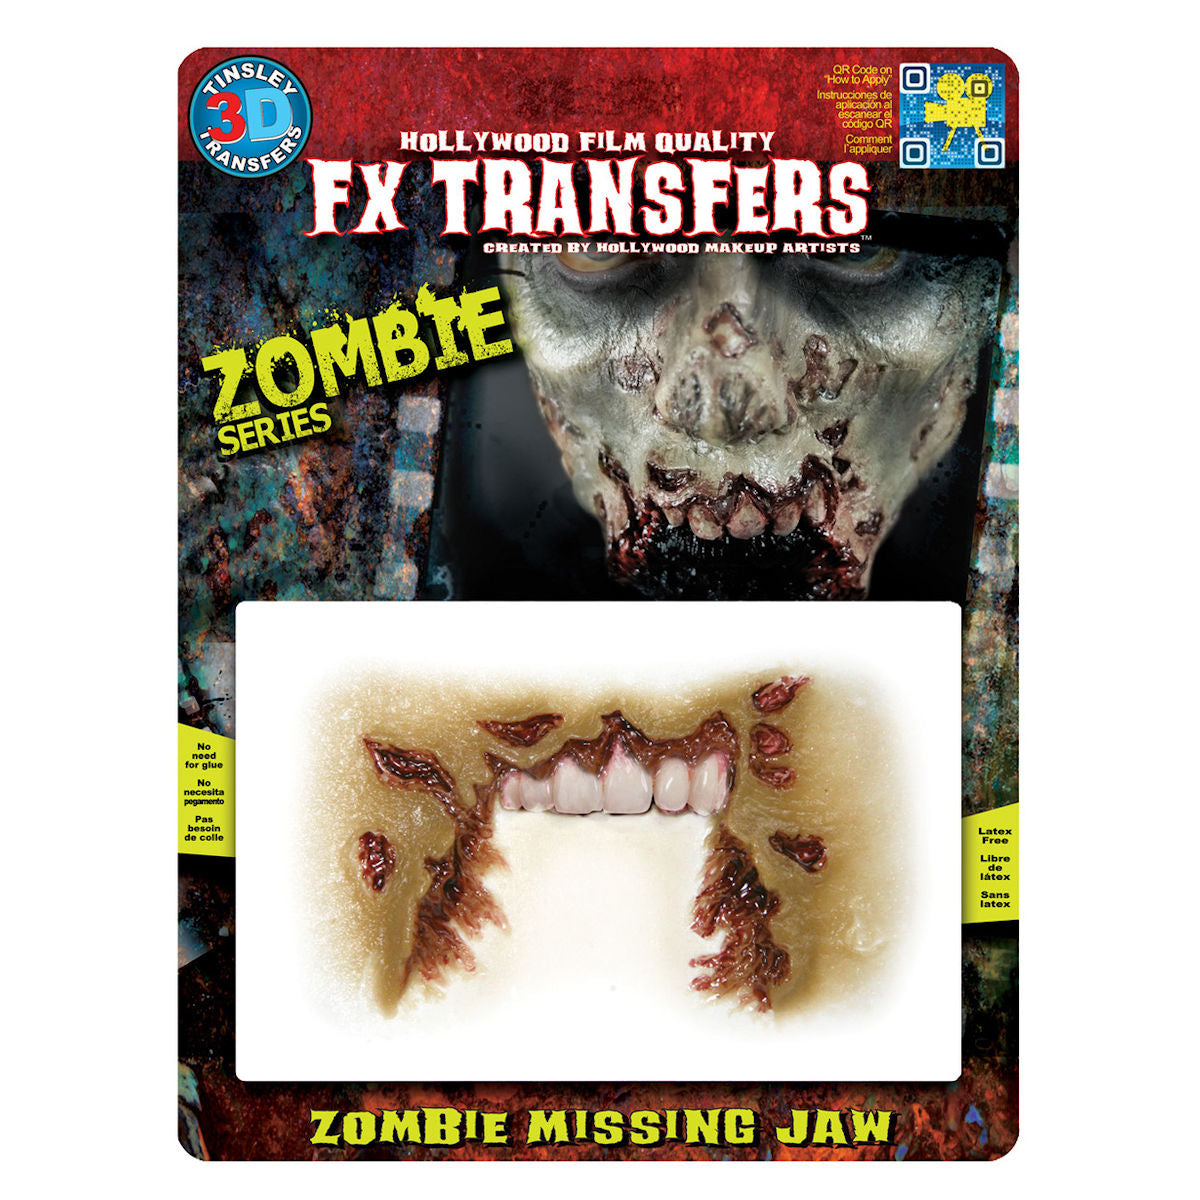 Zombie Missing Jaw 3D FX Transfer Tinsley Temporary Tattoo Halloween FX MakeUp